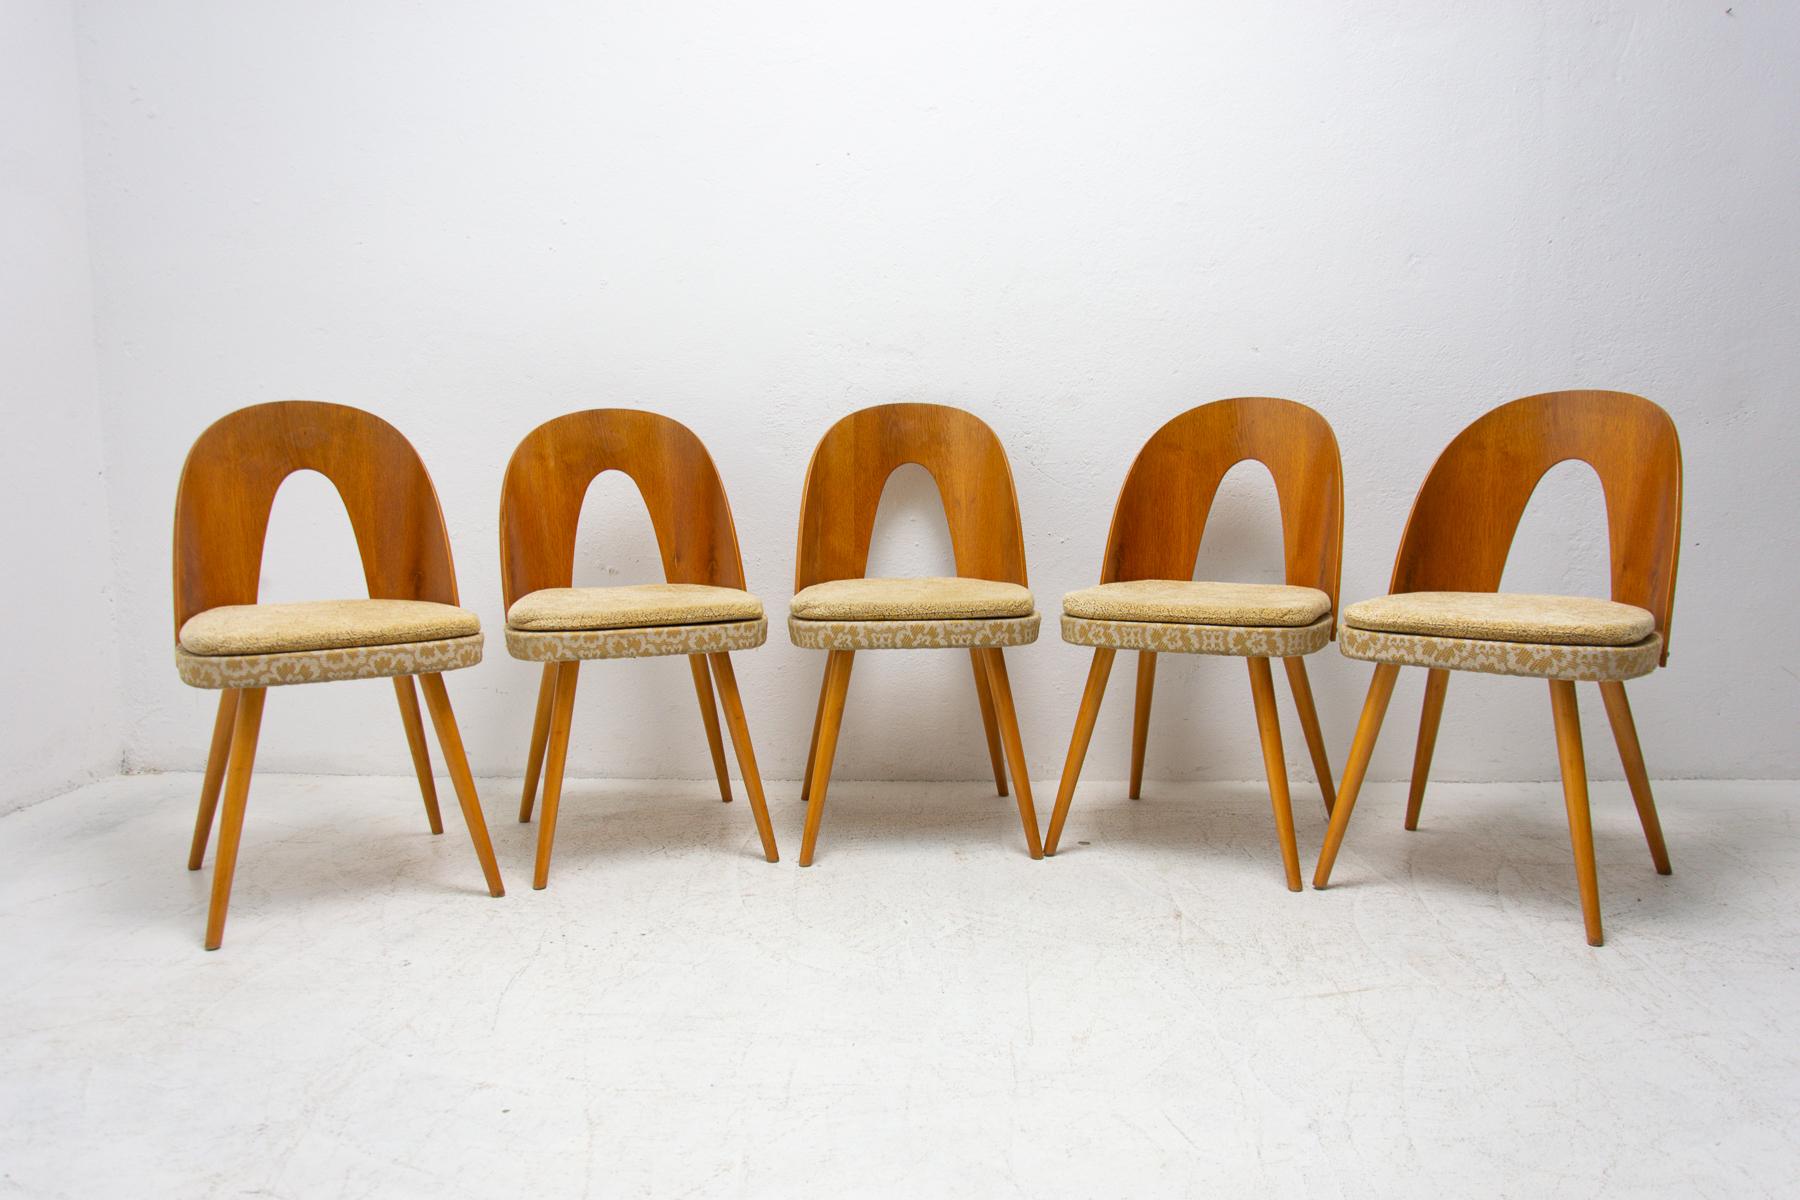 Set of five bentwood dining chairs designed by Antonin Suman. The seats are upholstered, the chairs are made of beech wood. Made in the former Czechoslovakia in the 1960´s. The chairs are in very good vintage condition, only one chair has a small